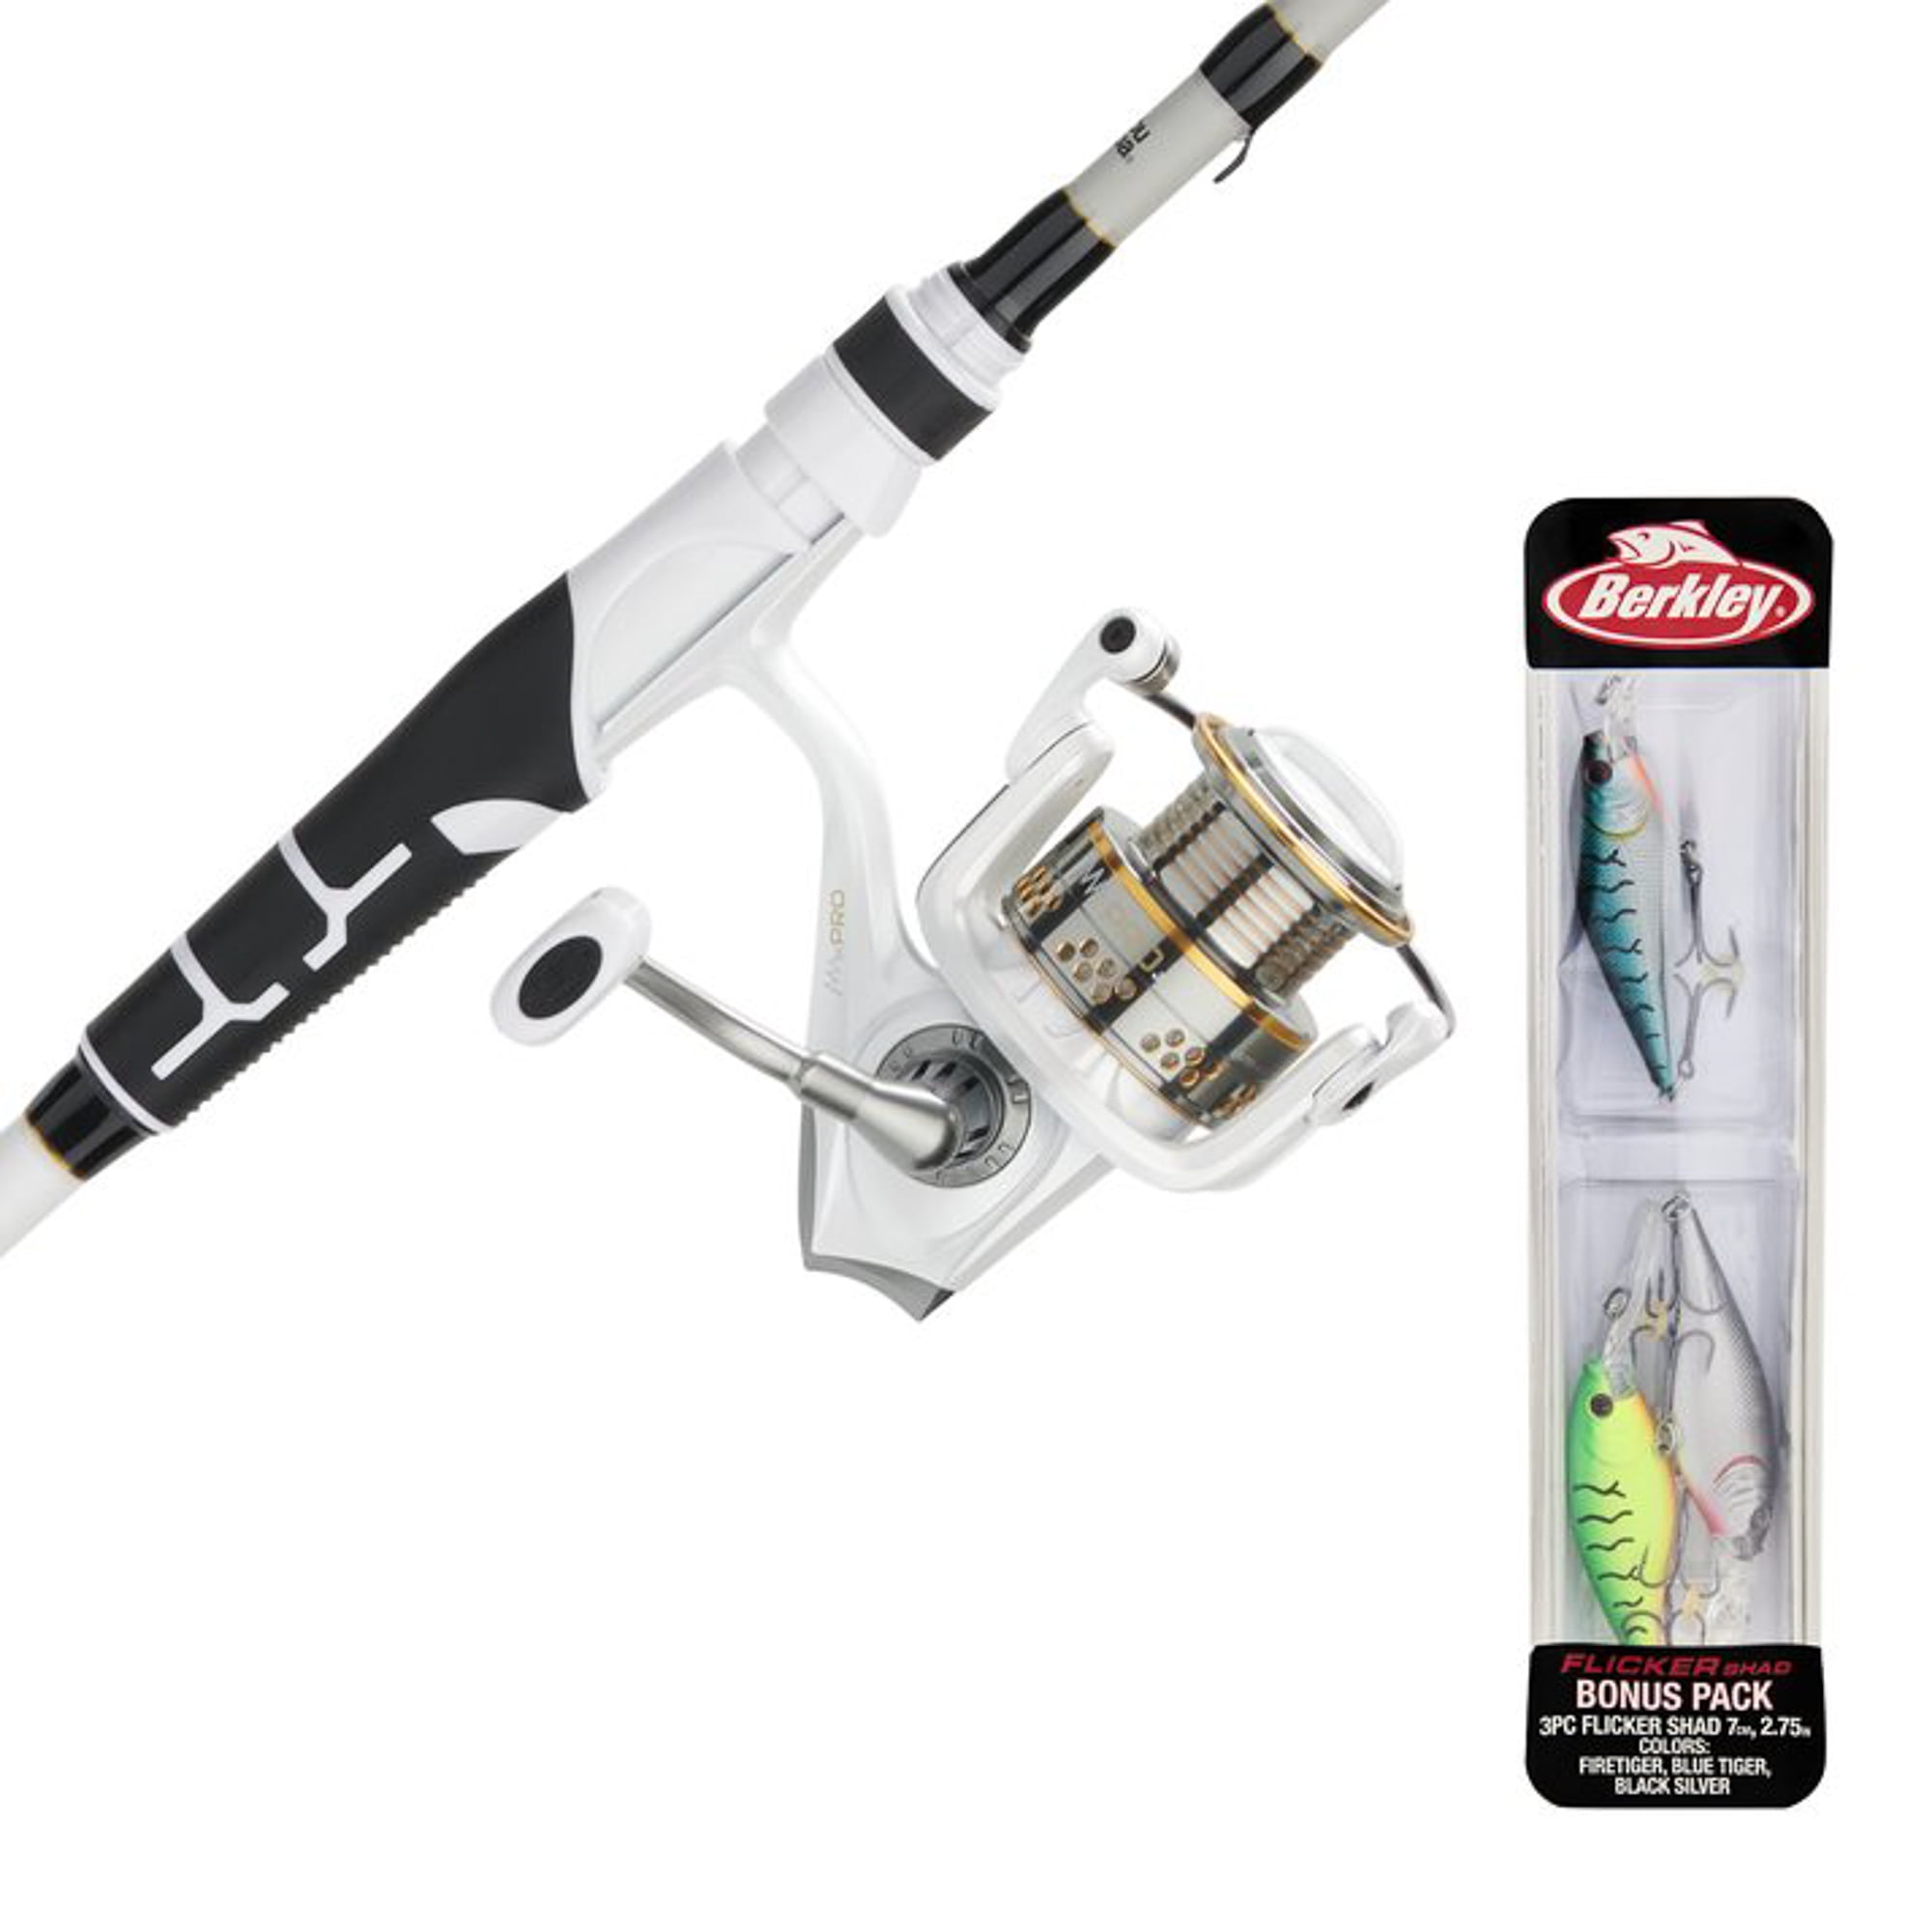 ABU GARCIA 9' CARDINAL BRUISER Fishing Combo Spinning Rod and Reel #BRSB92 5 for sale online 